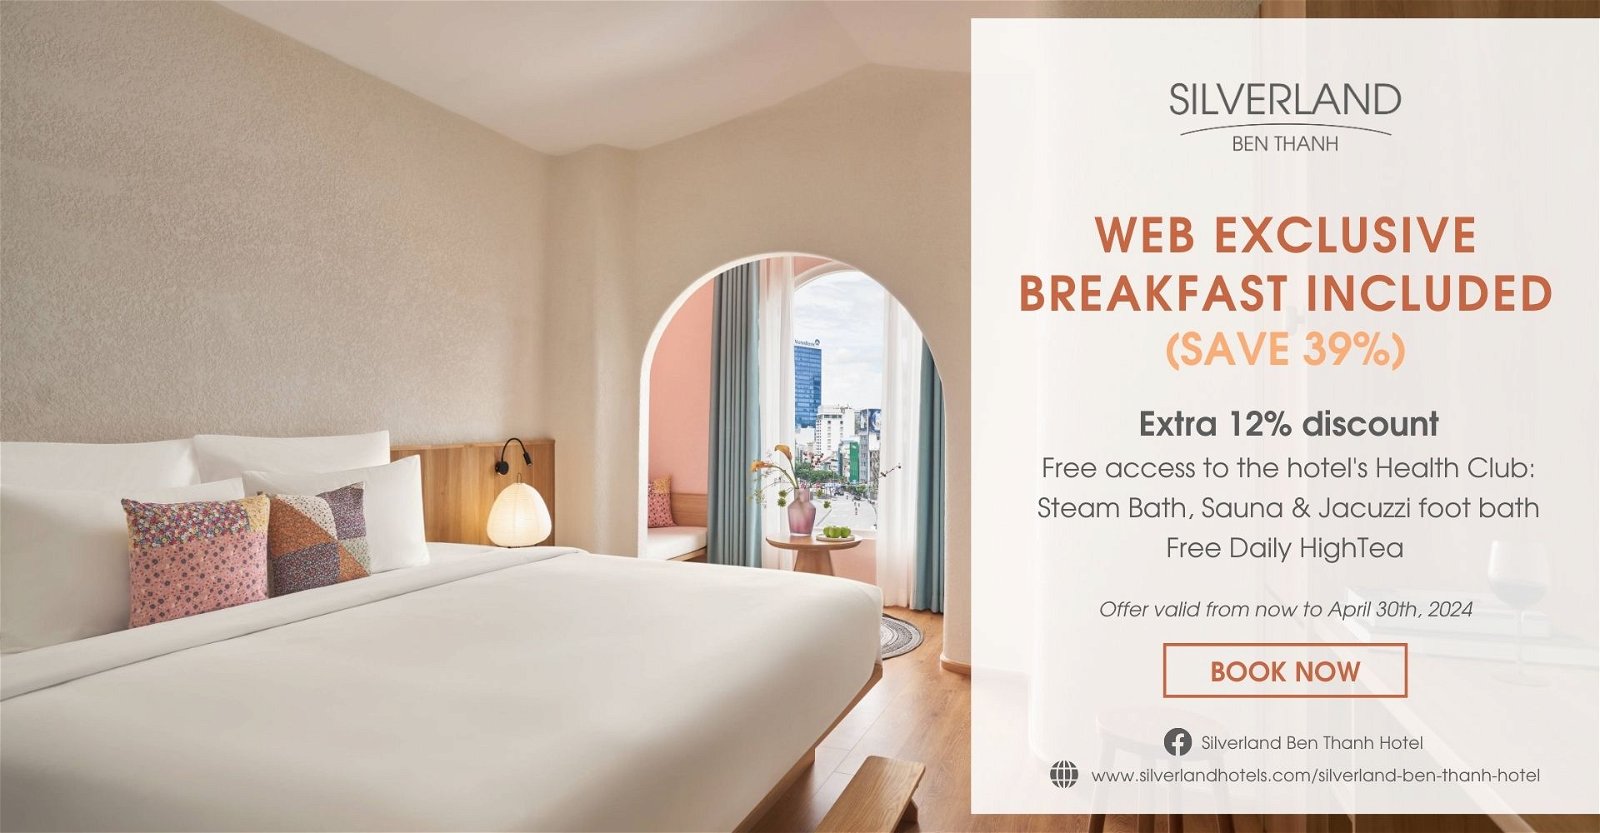 SILVERLAND BEN THANH – WEB EXCLUSIVE BREAKFAST INCLUDED HOT PACKAGE (SAVE 39%)